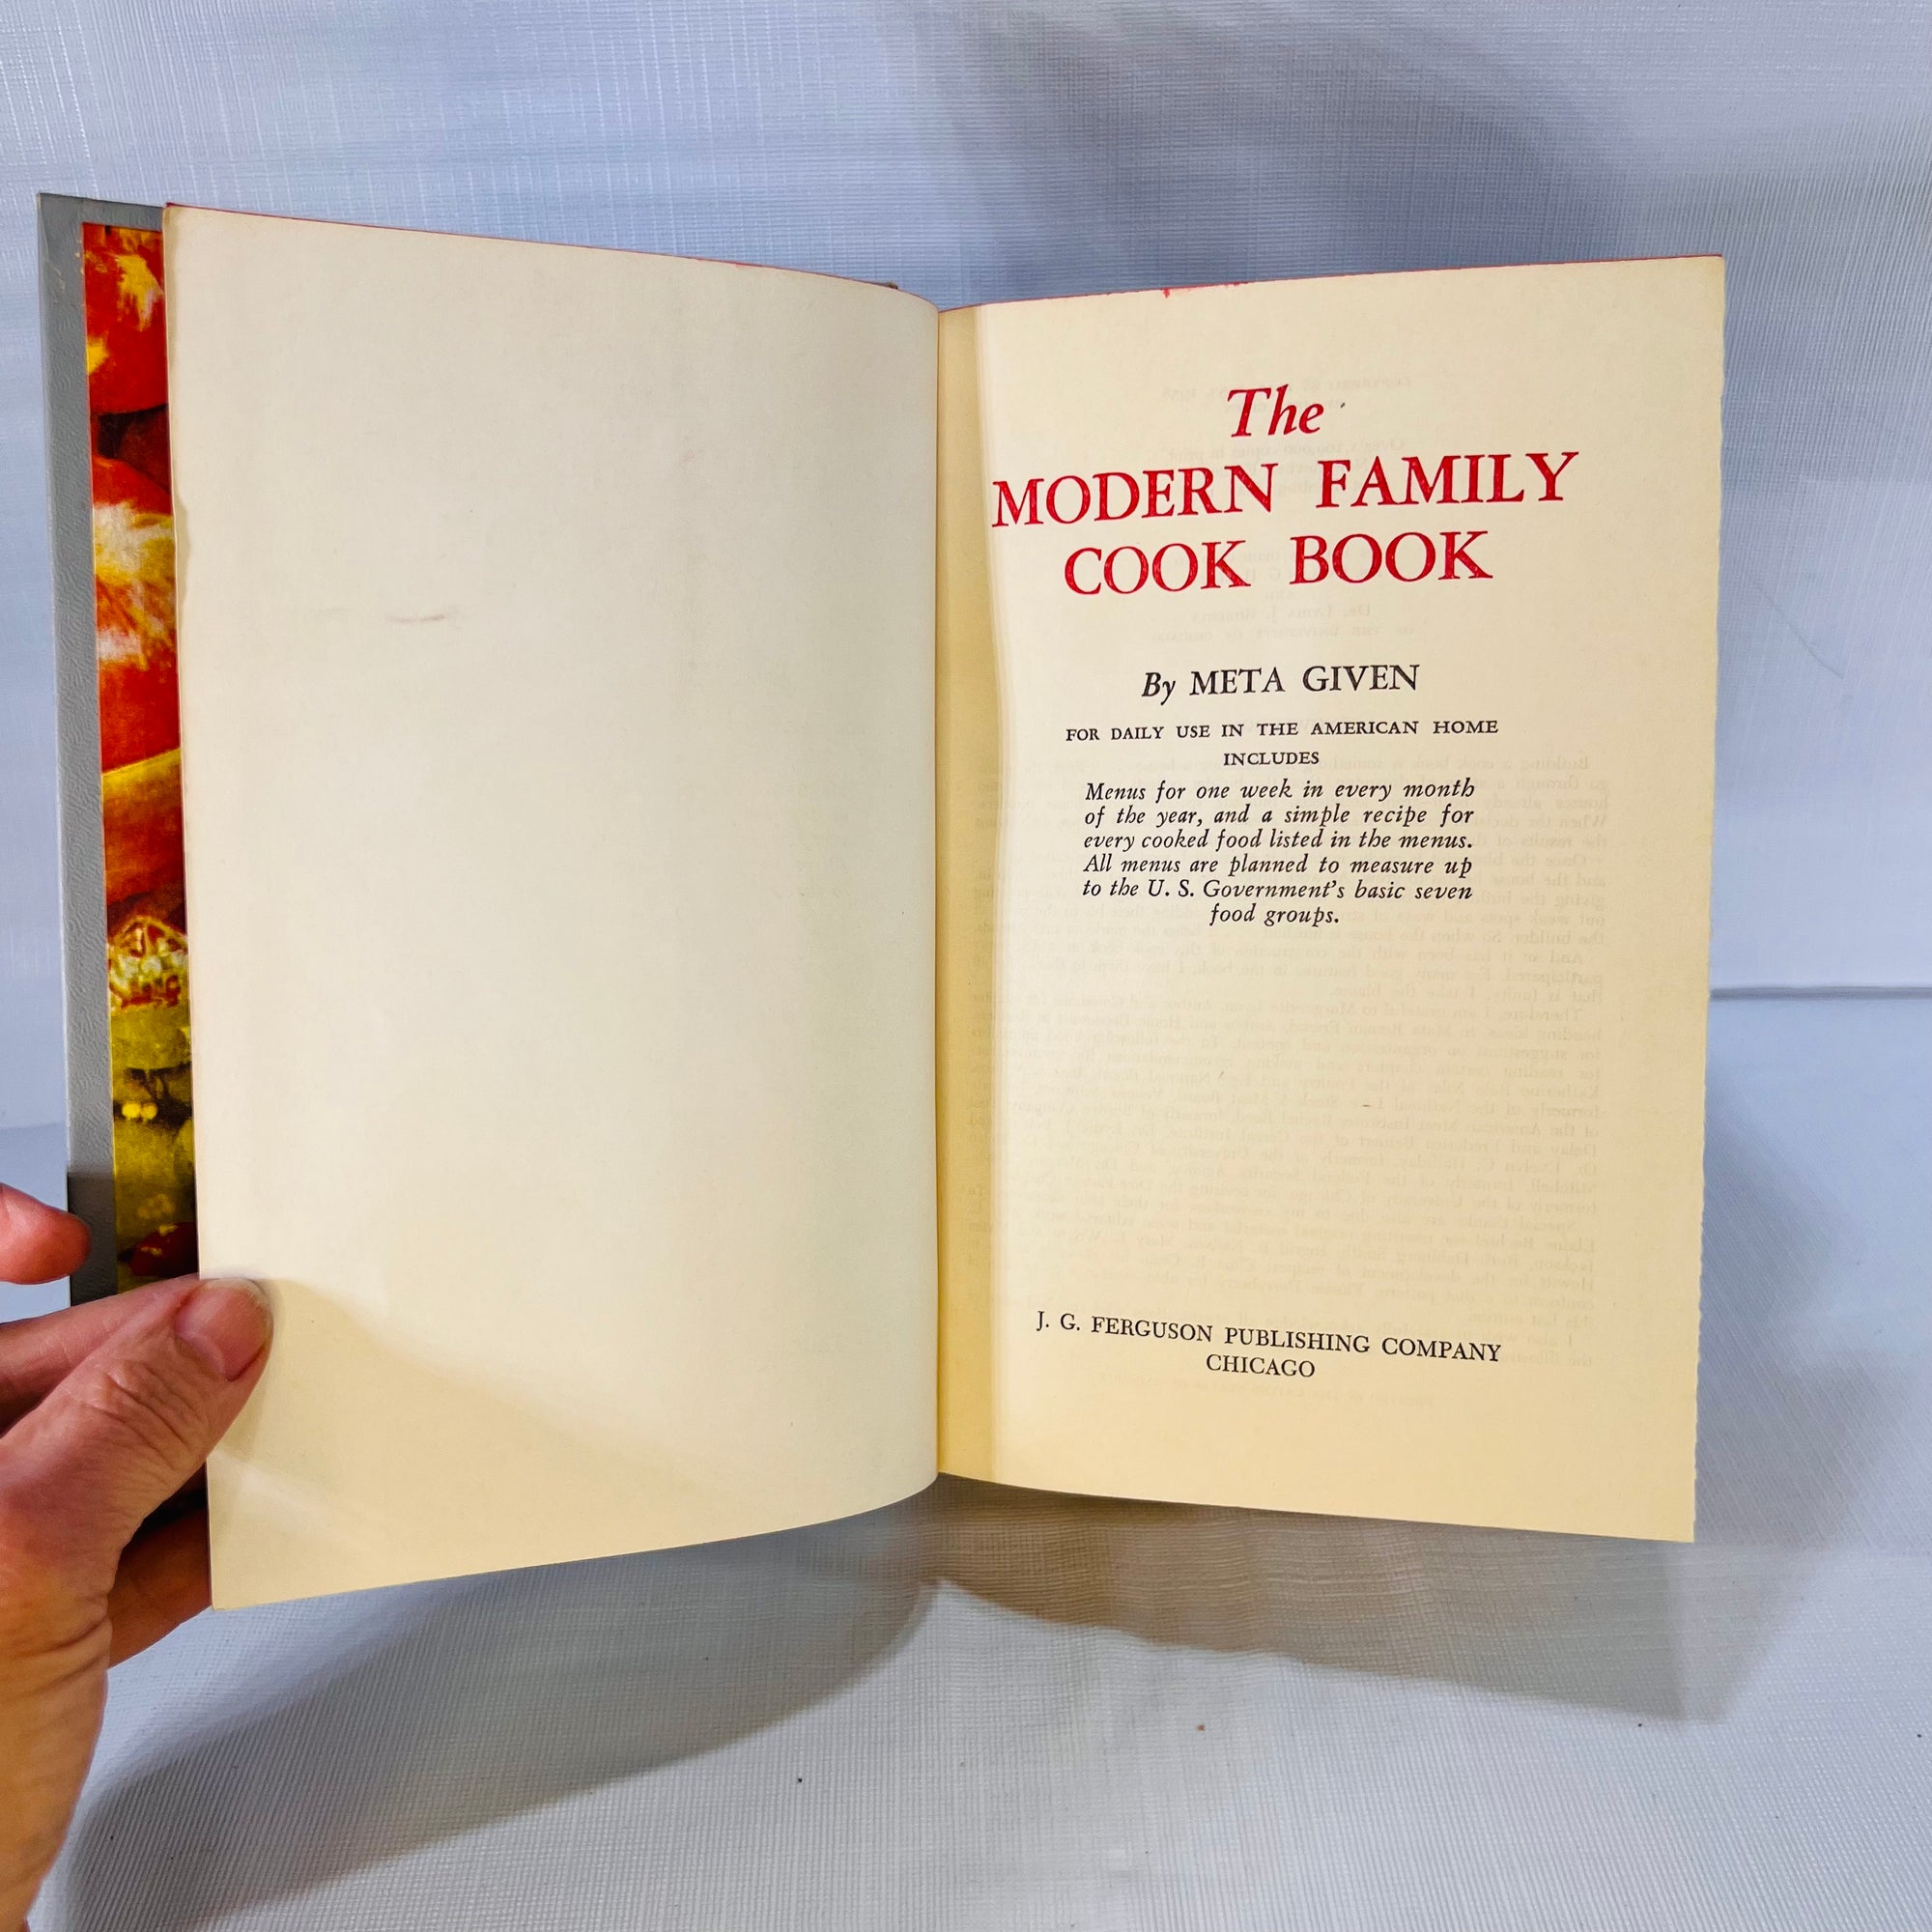 The Modern Family Cook Book by Meta Given 1958 published by J.G. Ferguson & Associates